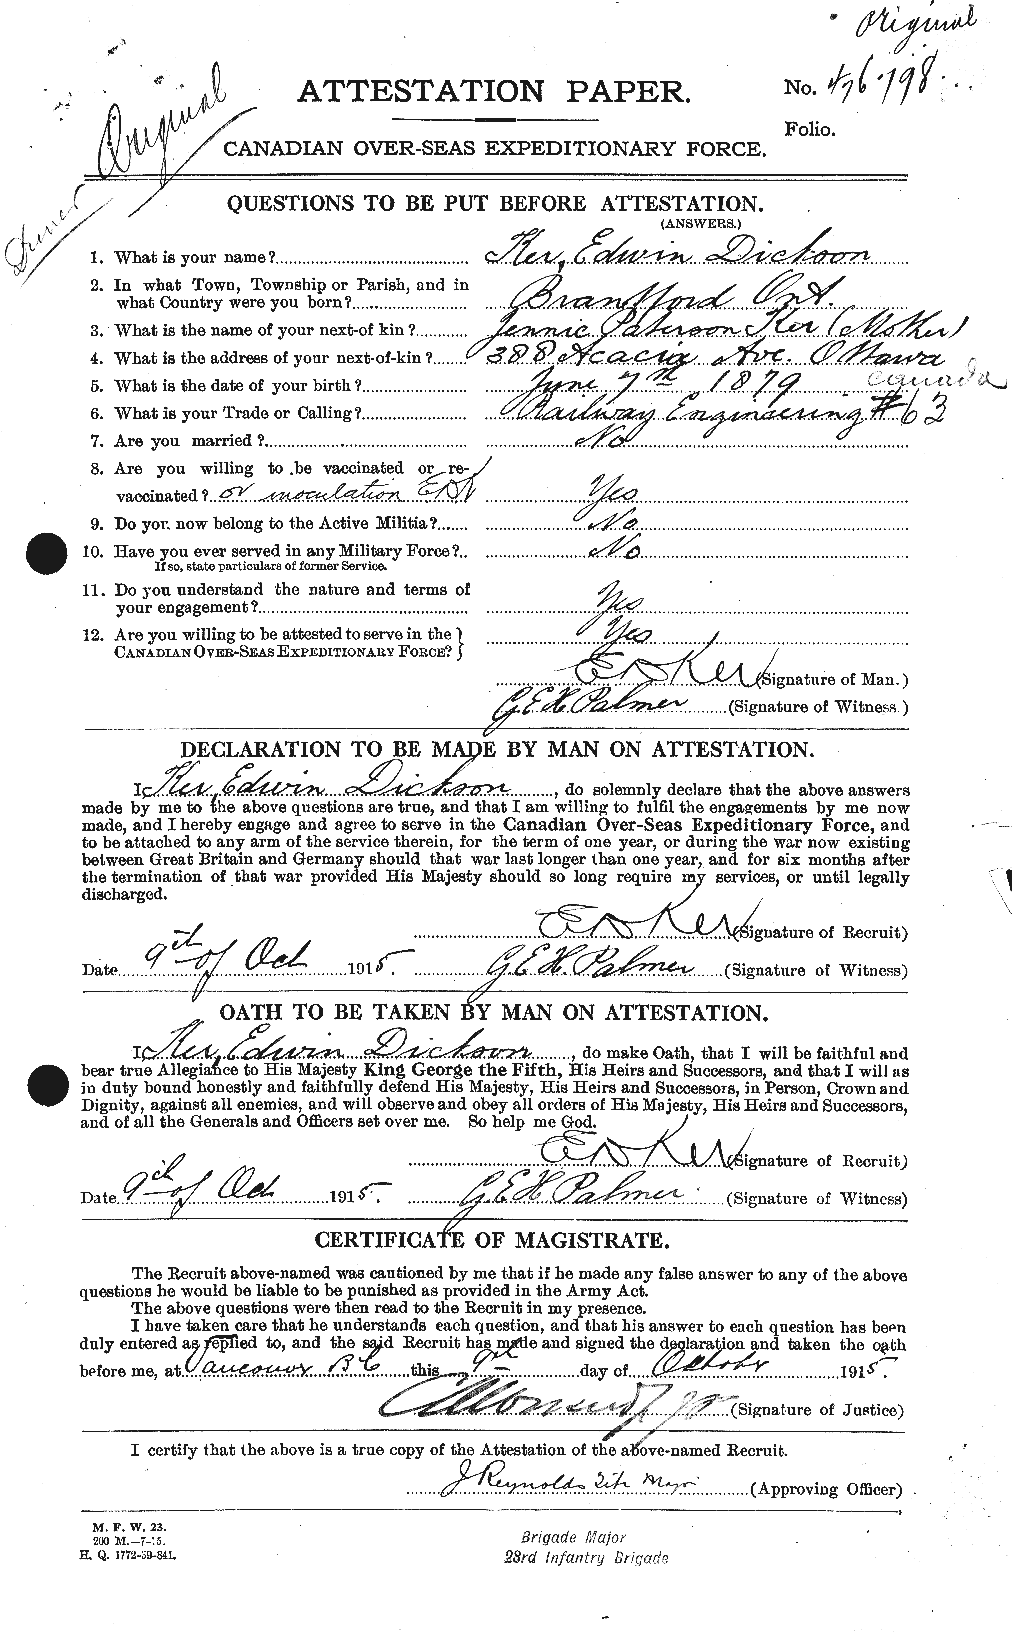 Personnel Records of the First World War - CEF 430573a